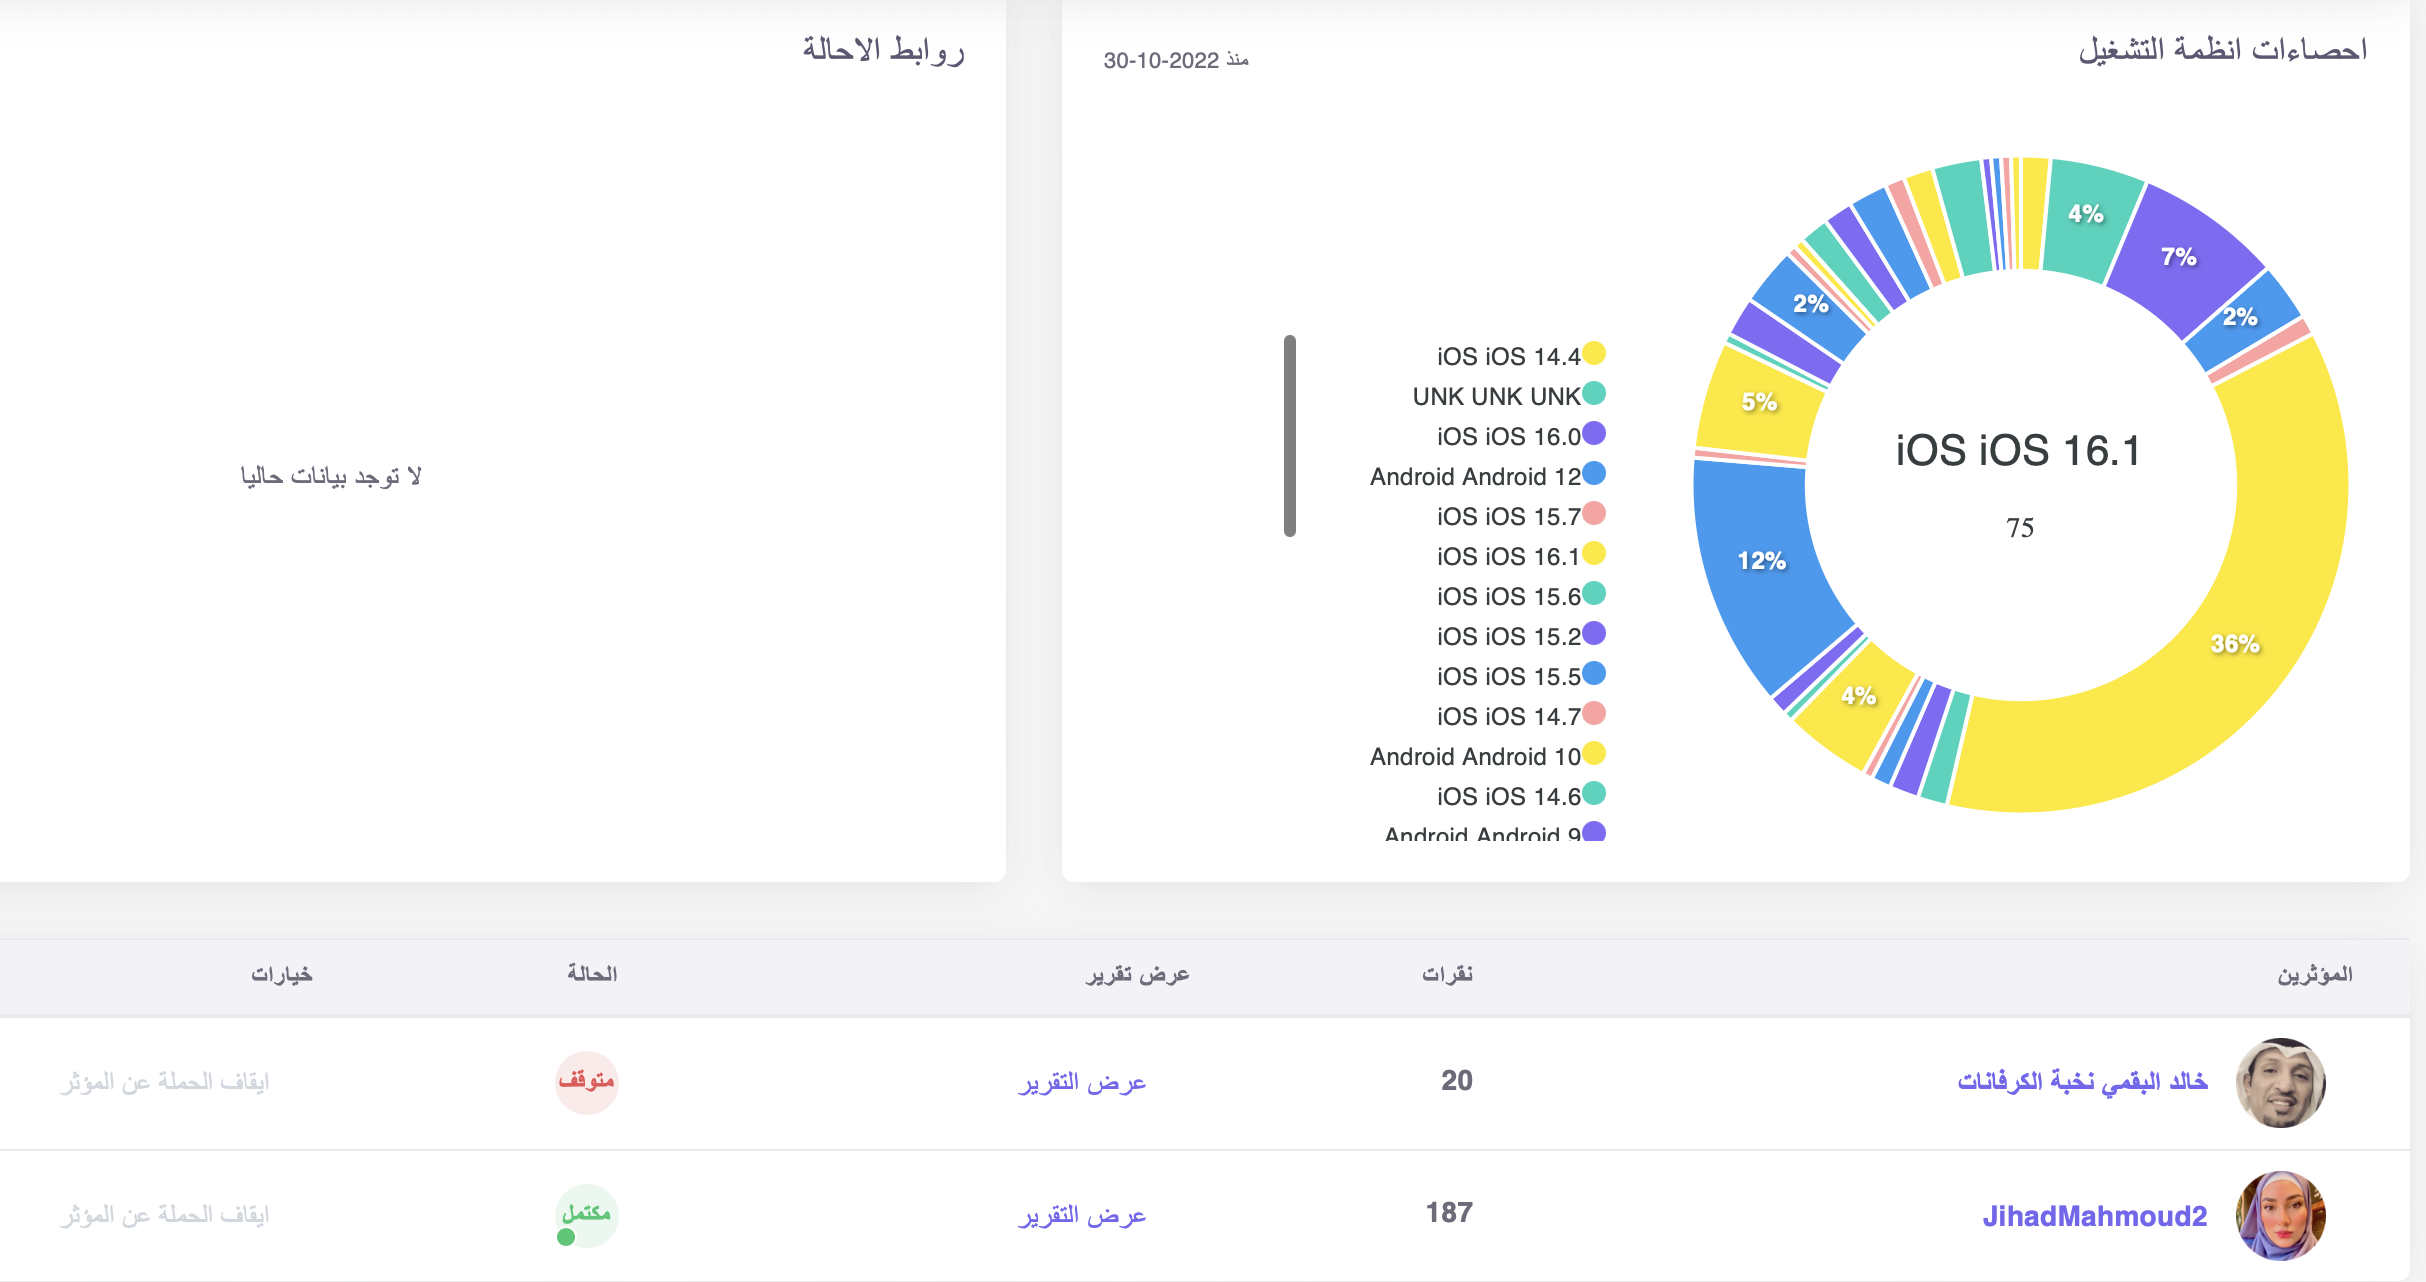 run influencer marketing campaign with full detailed report about OS in MENA